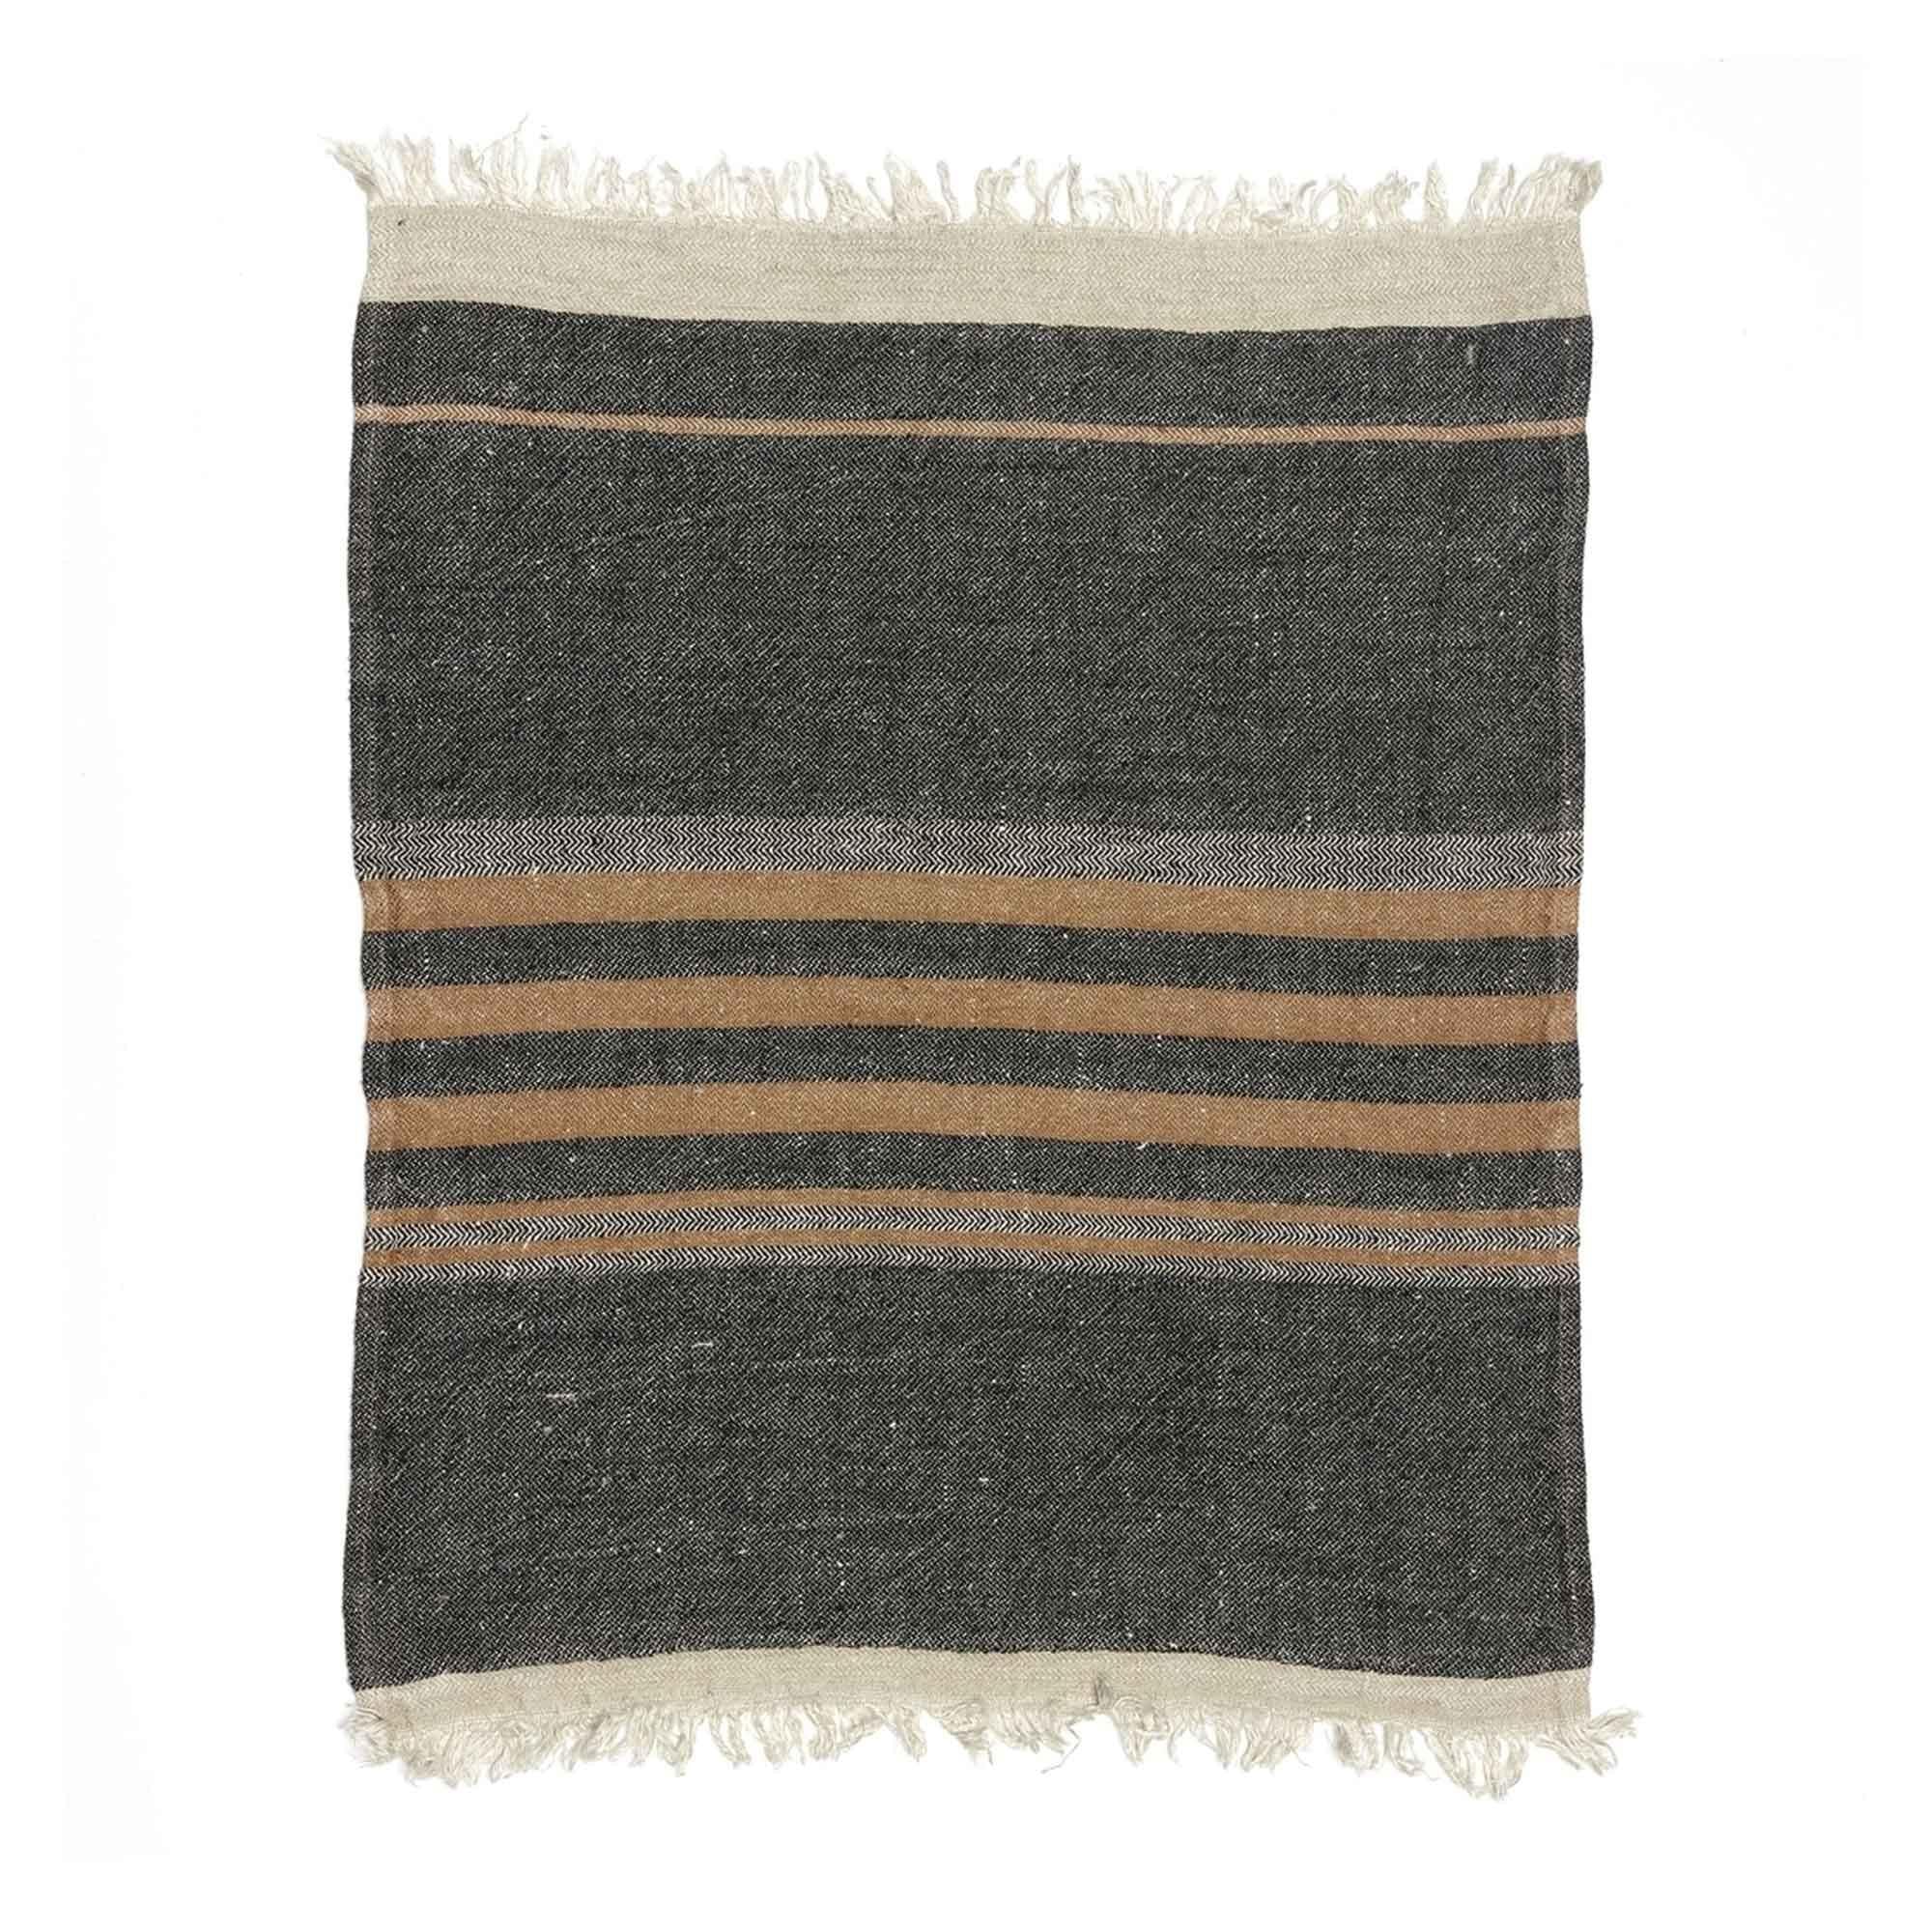 Belgian linen fouta throw blanket flat lay product shot in color Black Stripe by Libeco for South Hous.